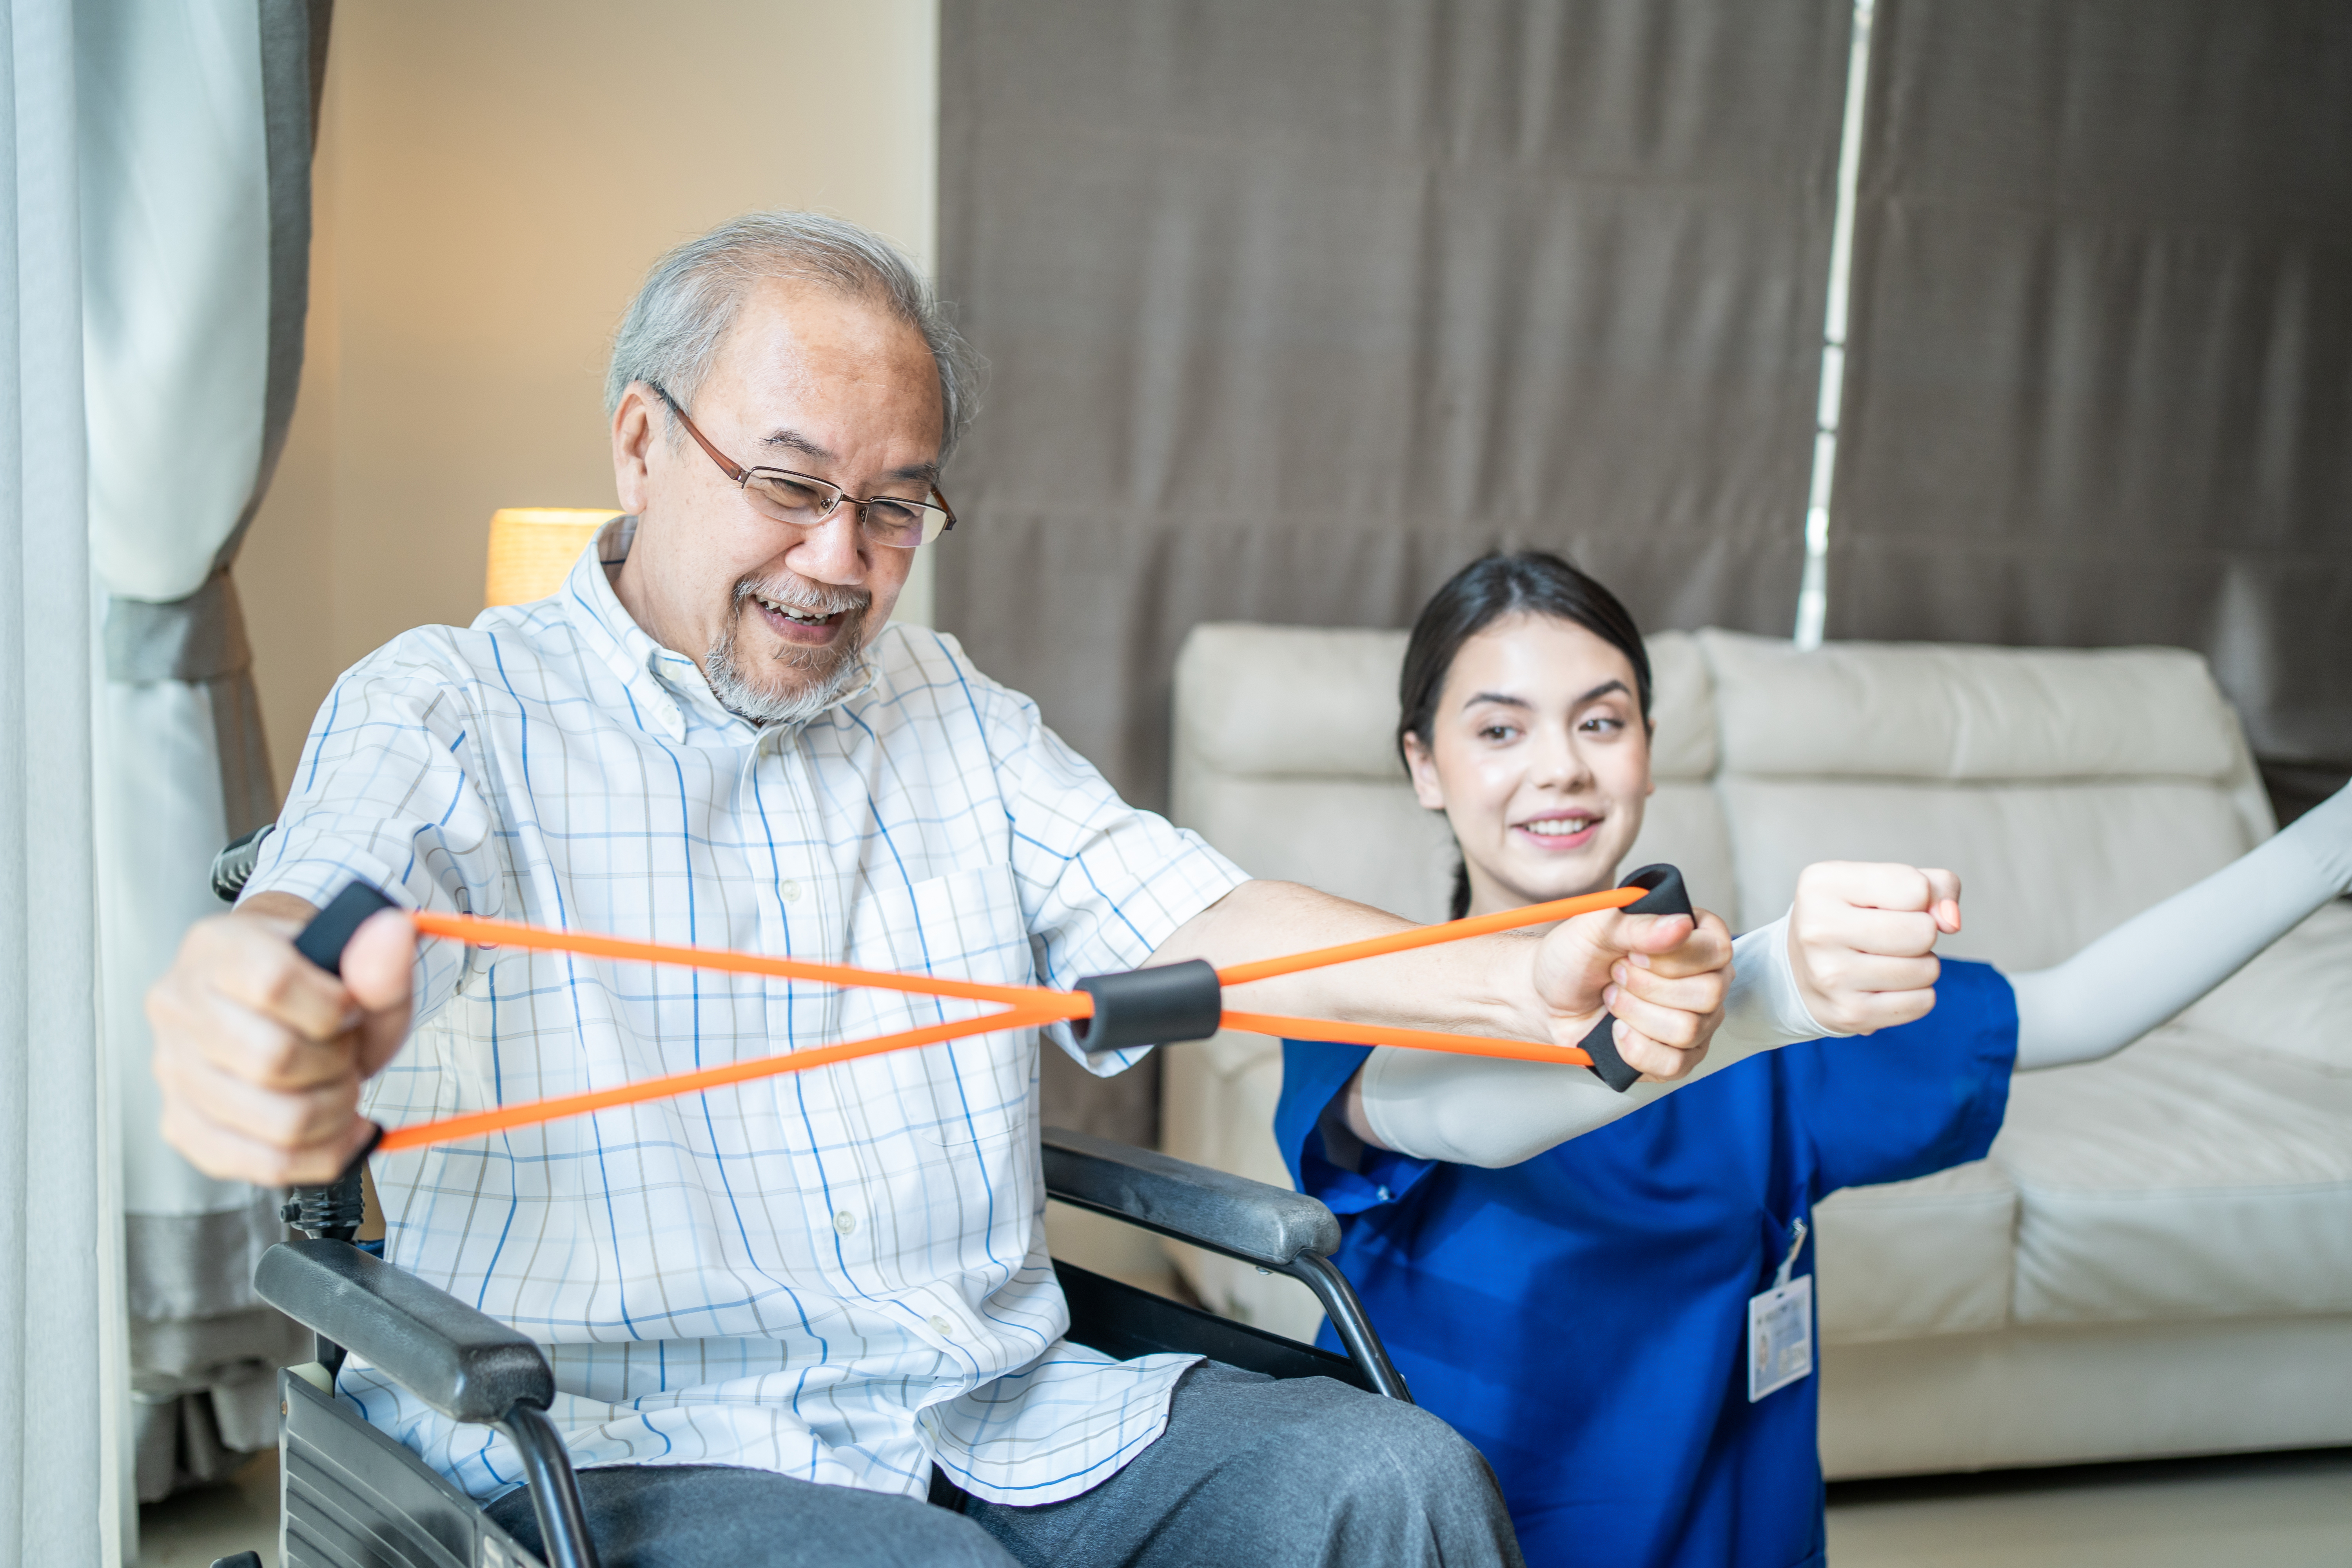 Physiotherapist assistant helping man in wheelchair use resistance bands